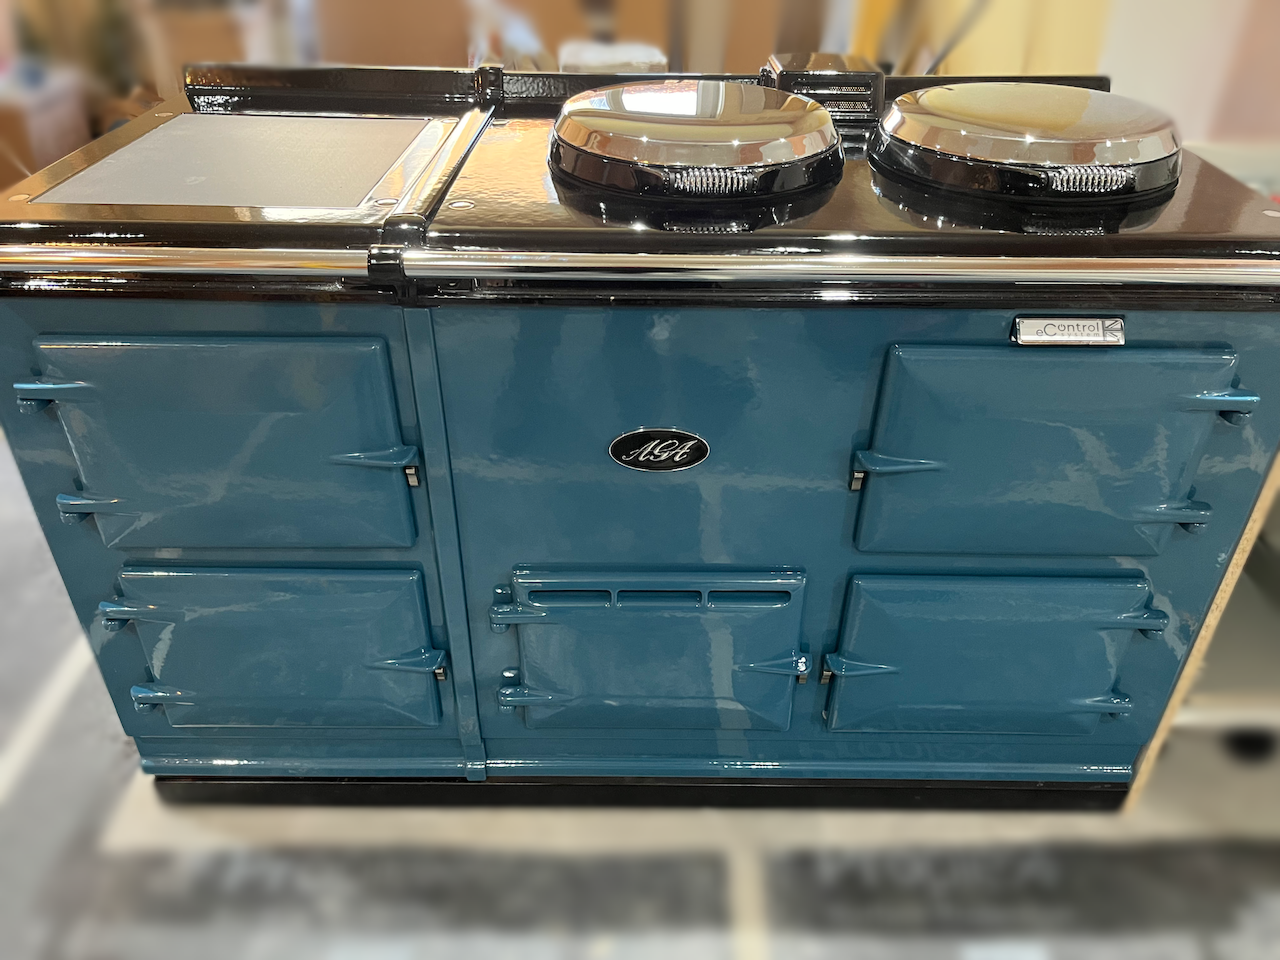 Reconditioned 4 Oven eControl Aga Cooker (Peacock)